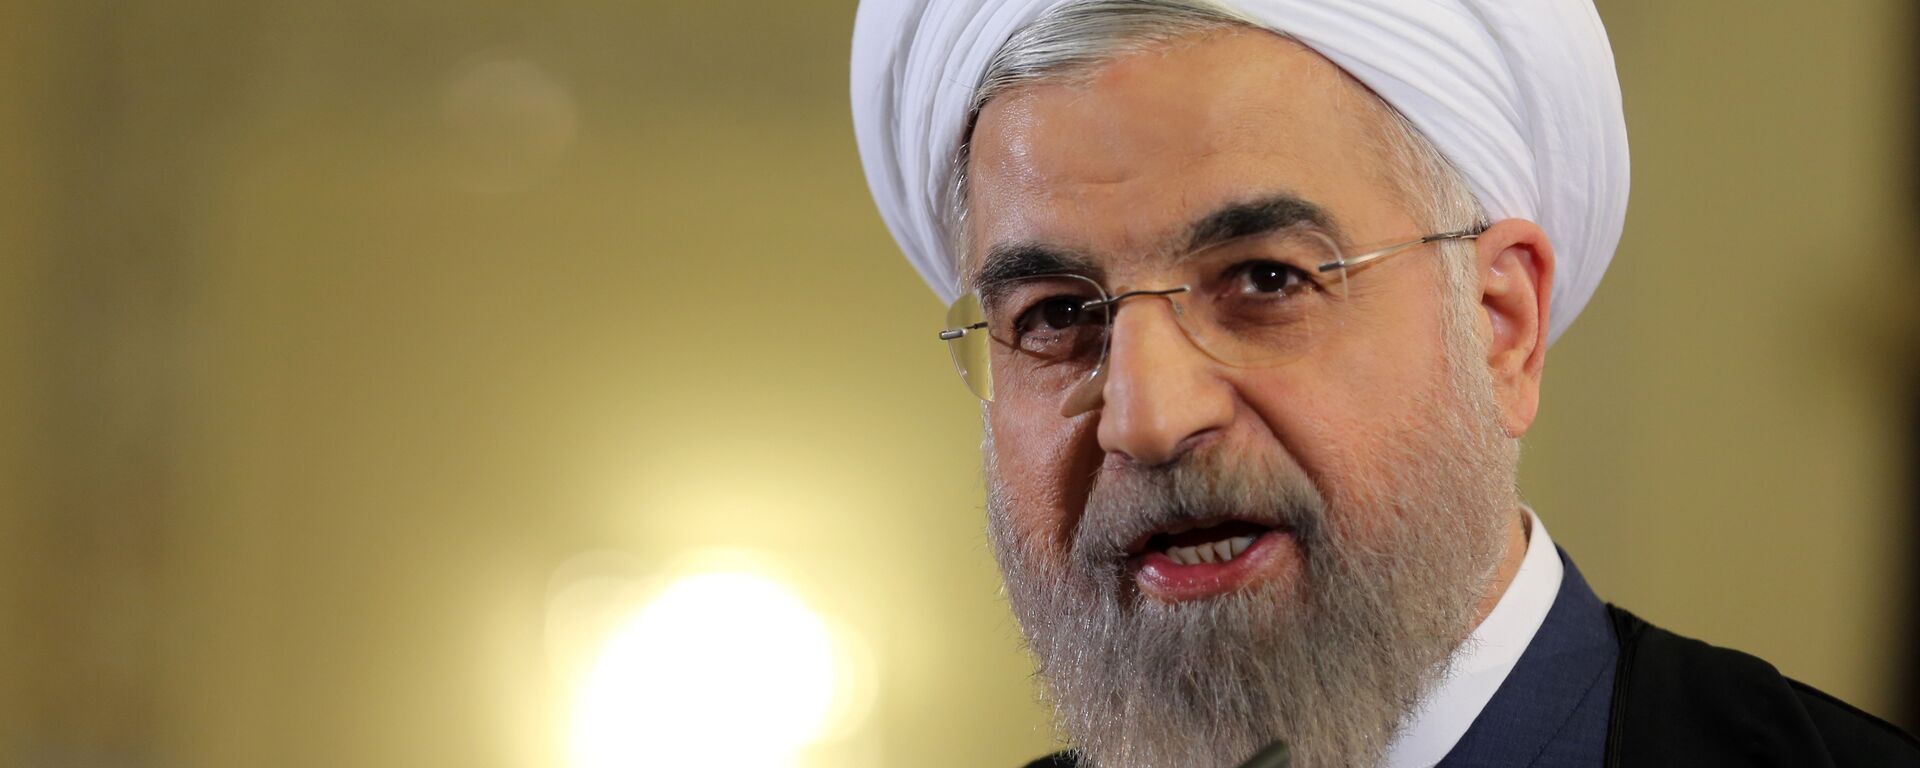 Iranian President Hassan Rouhani speaks during a press conference in Tehran on April 3, 2015. - Sputnik Mundo, 1920, 07.04.2021